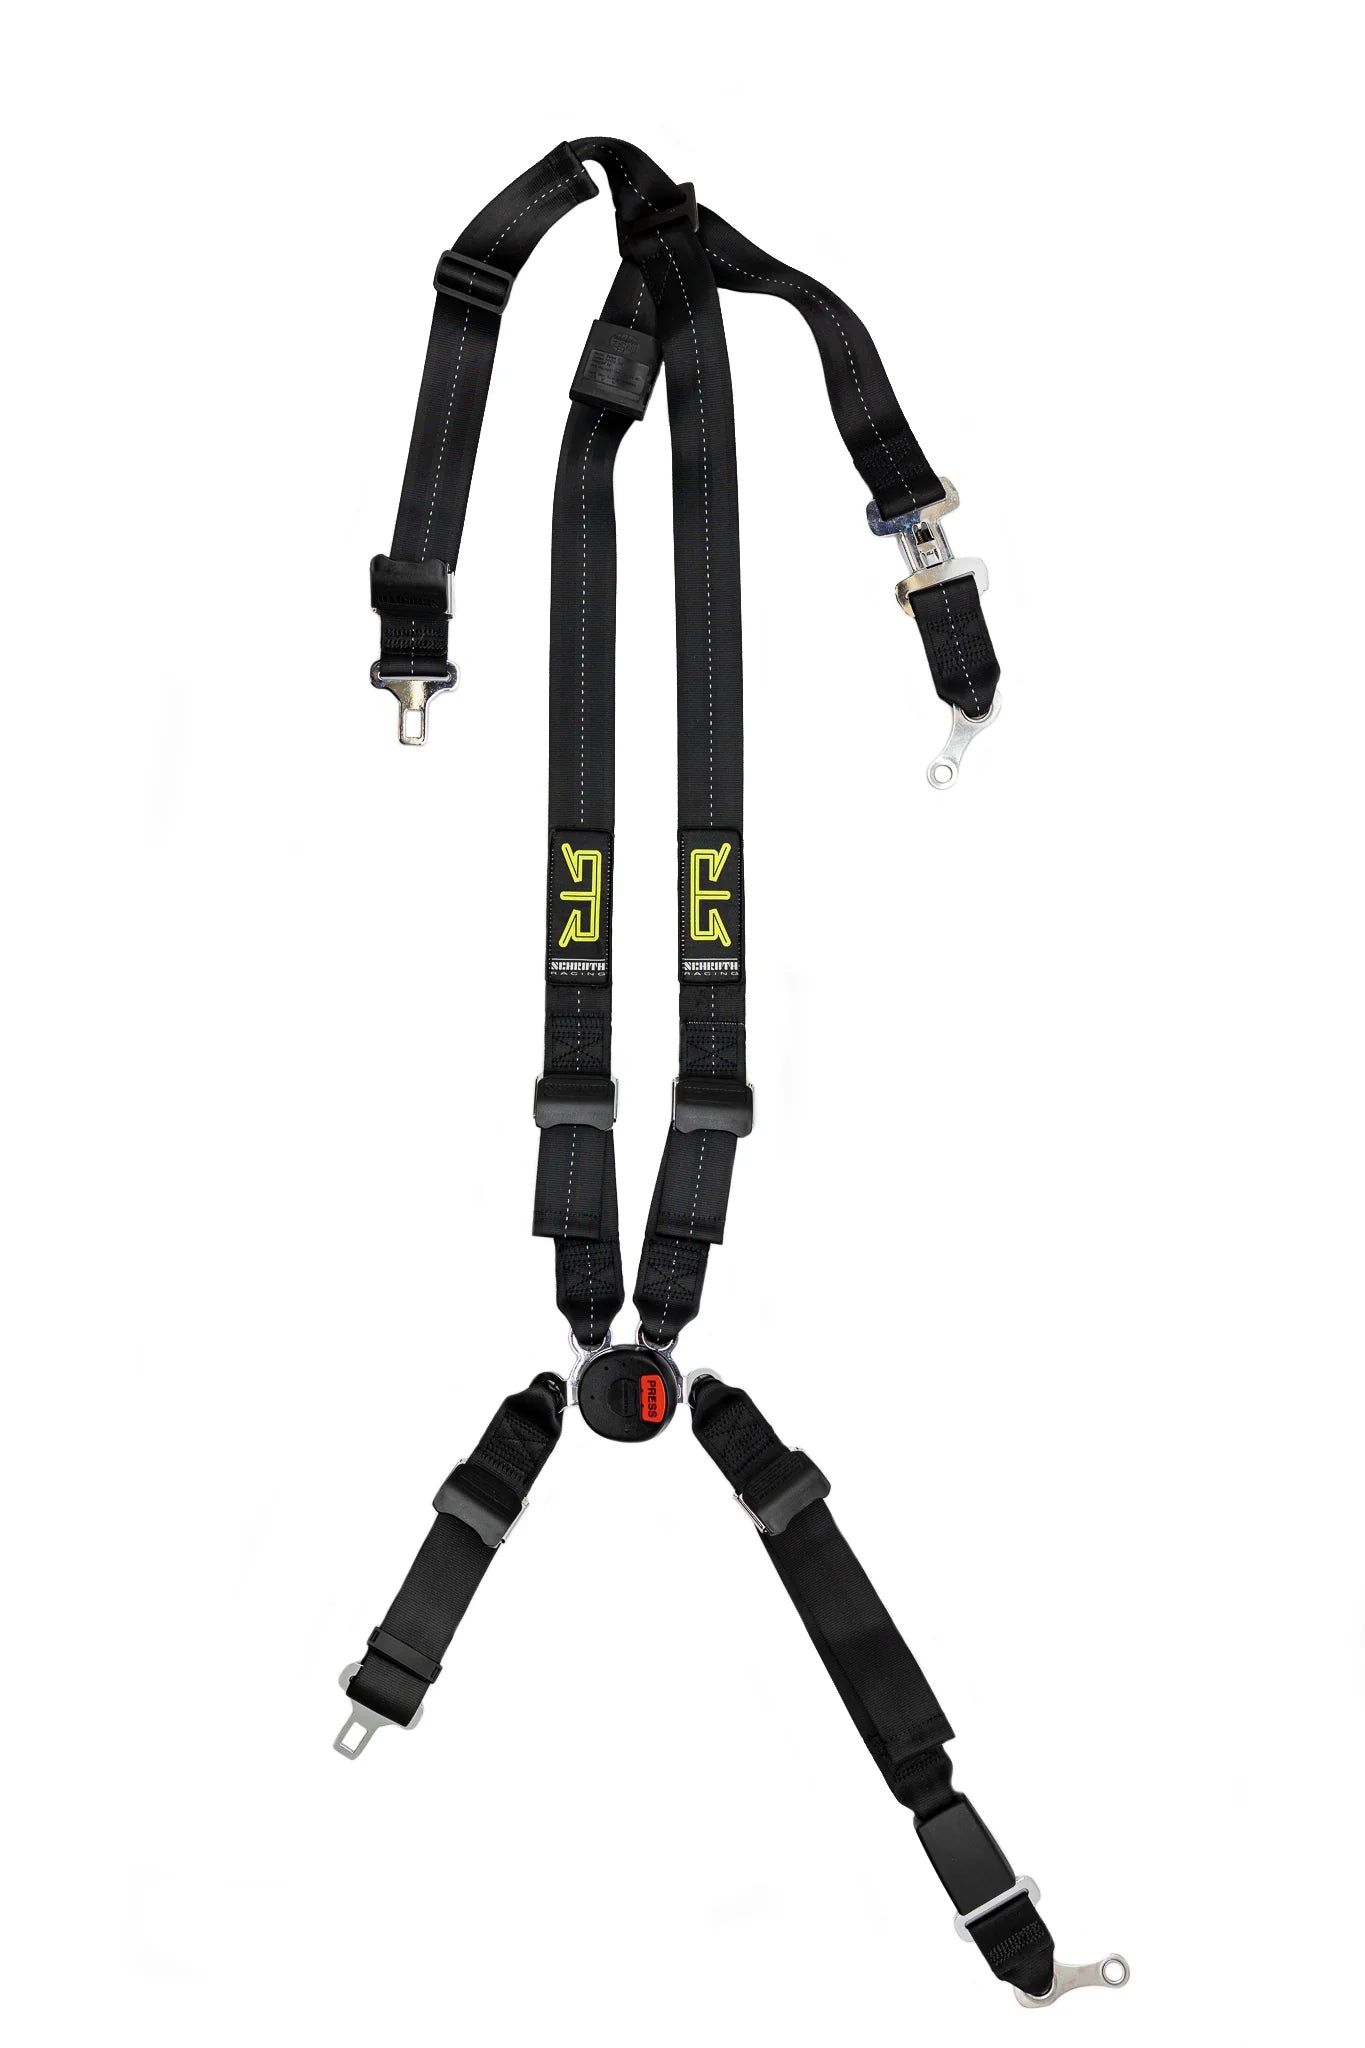 RTR 2005-24 Quick fit Pro Harness (LHS)